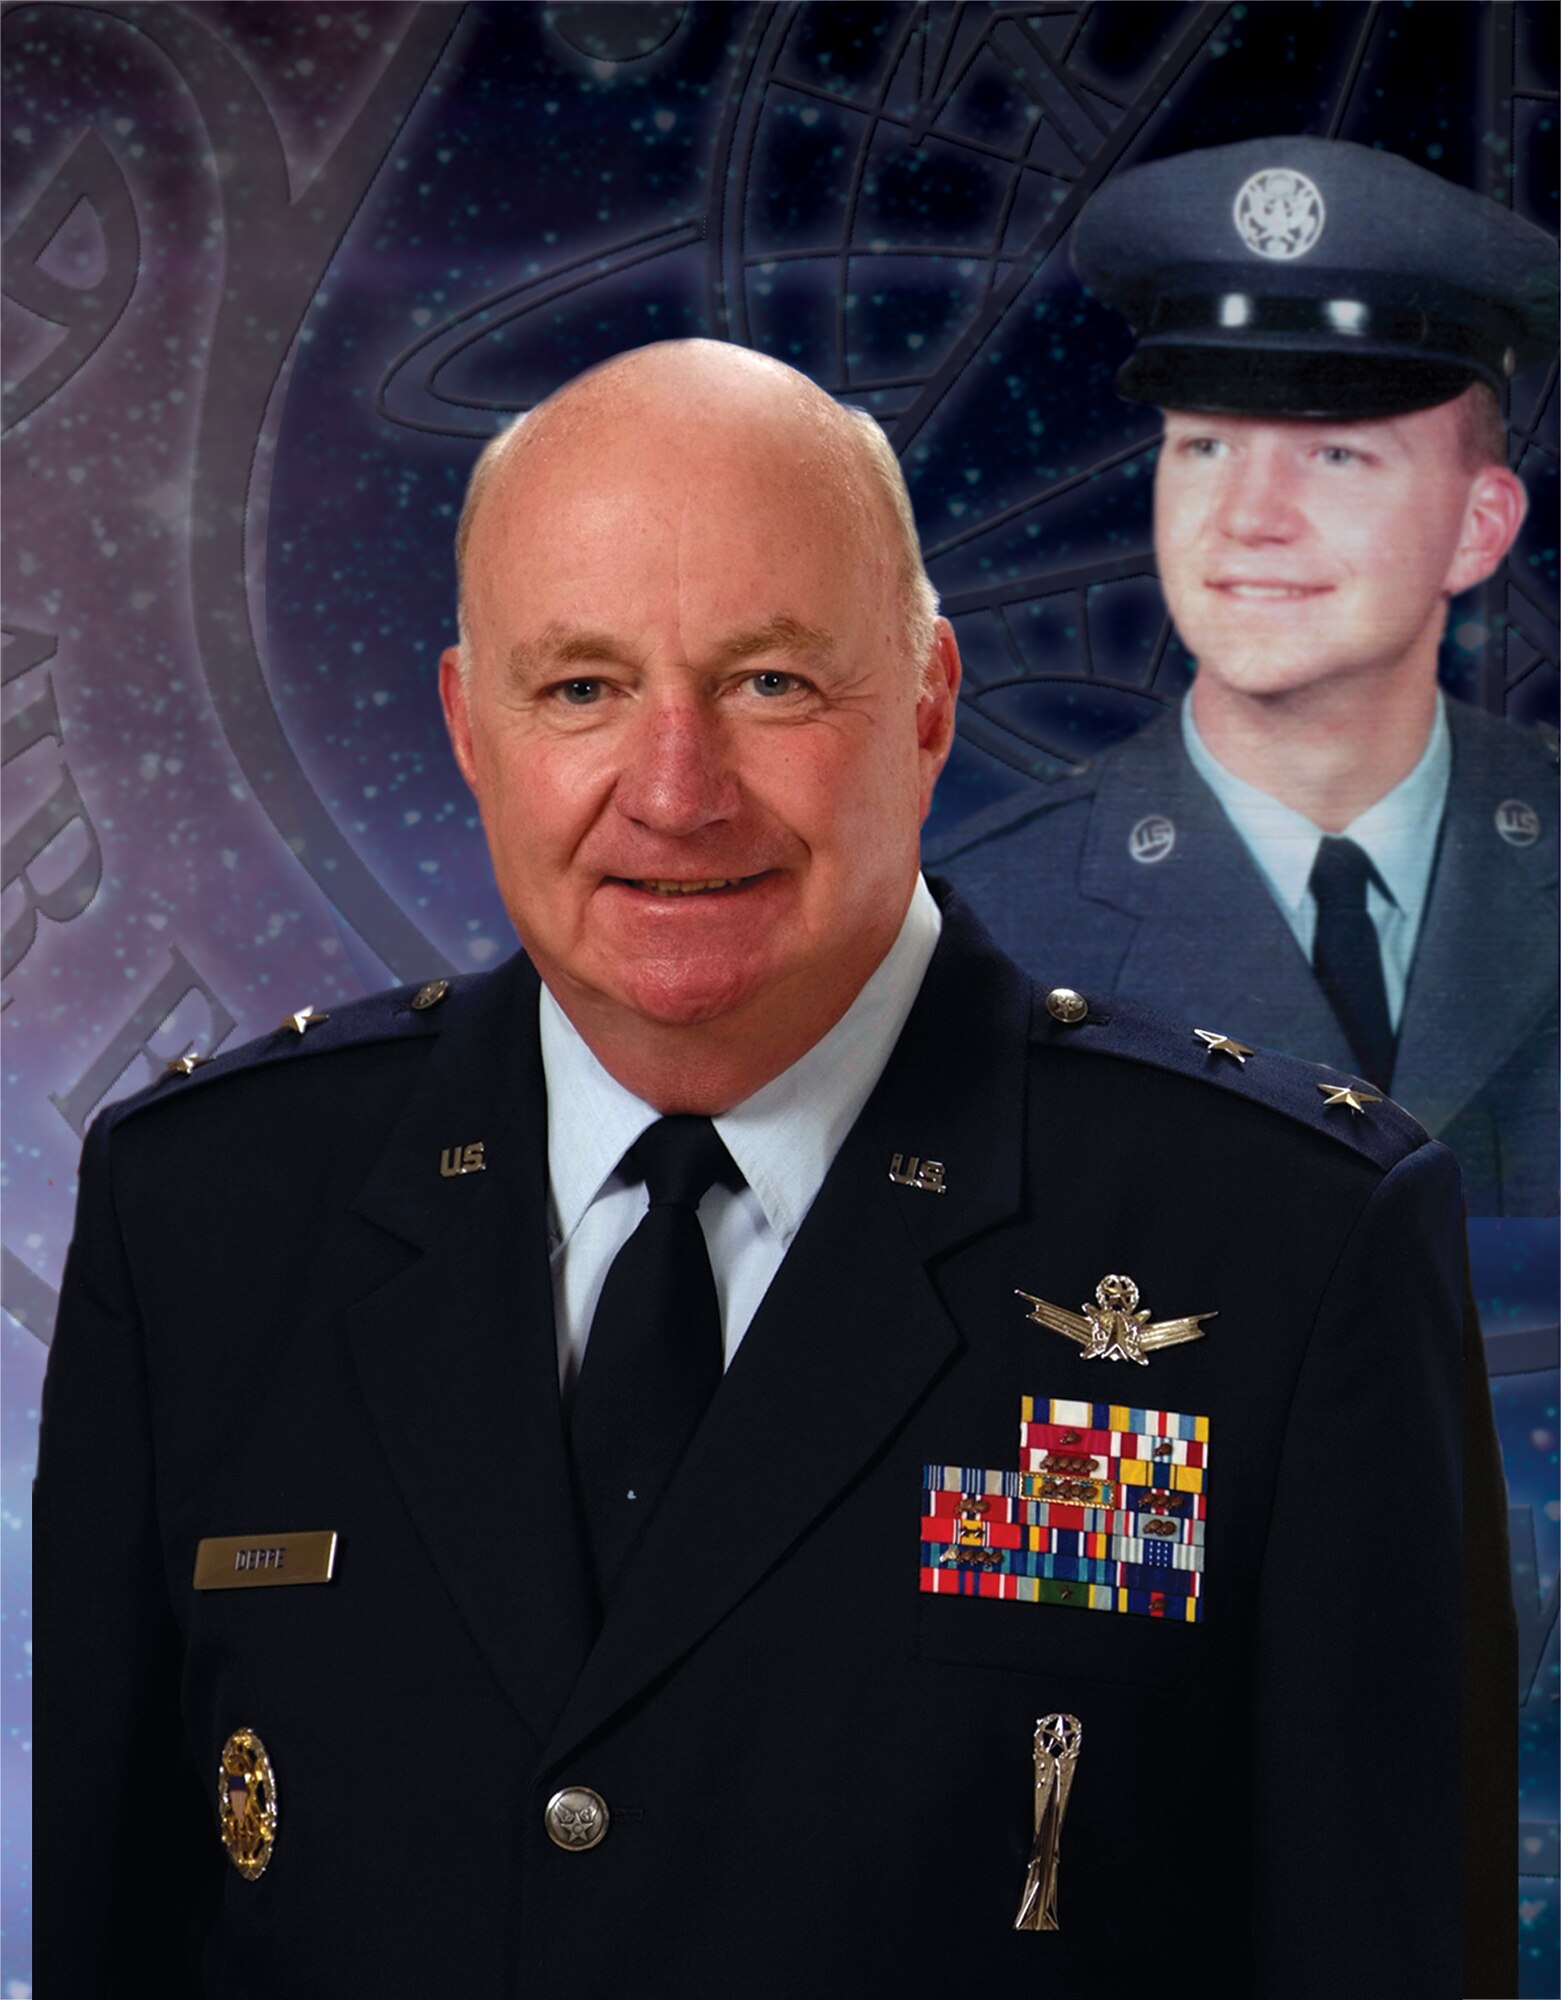 PETERSON AIR FORCE BASE, Colo. --  Maj. Gen. Thomas Deppe, vice commander of Air Force Space Command, Peterson Air Force Base, Colo., is set to retire from the Air Force after 42 years of service. (U.S. Air Force photo graphic)